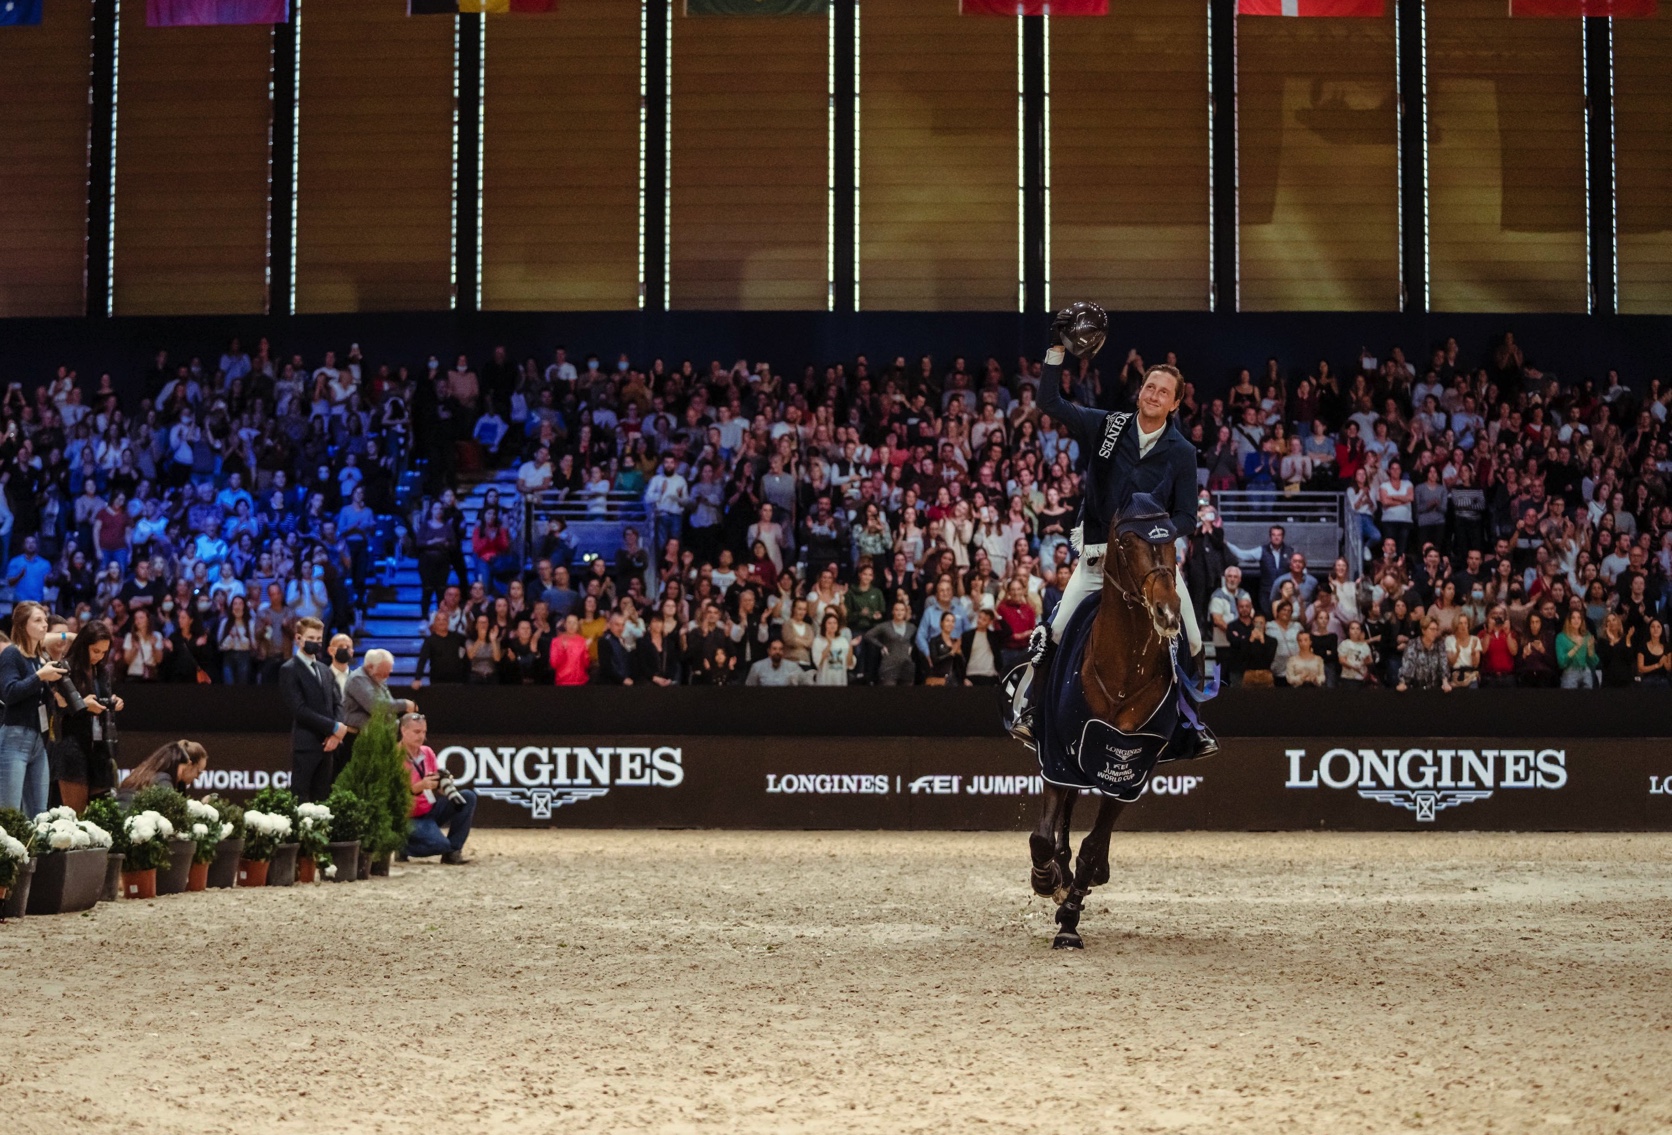 Martin Fuchs and Chaplin galloped to victory in front of a full house at the second leg of the Longines FEI Jumping World Cup™ 2021/2022 Western European League at Lyon in France today. This was the Swiss rider’s third consecutive time to win the Lyon leg of the prestigious series. (FEI/Christophe Taniére)